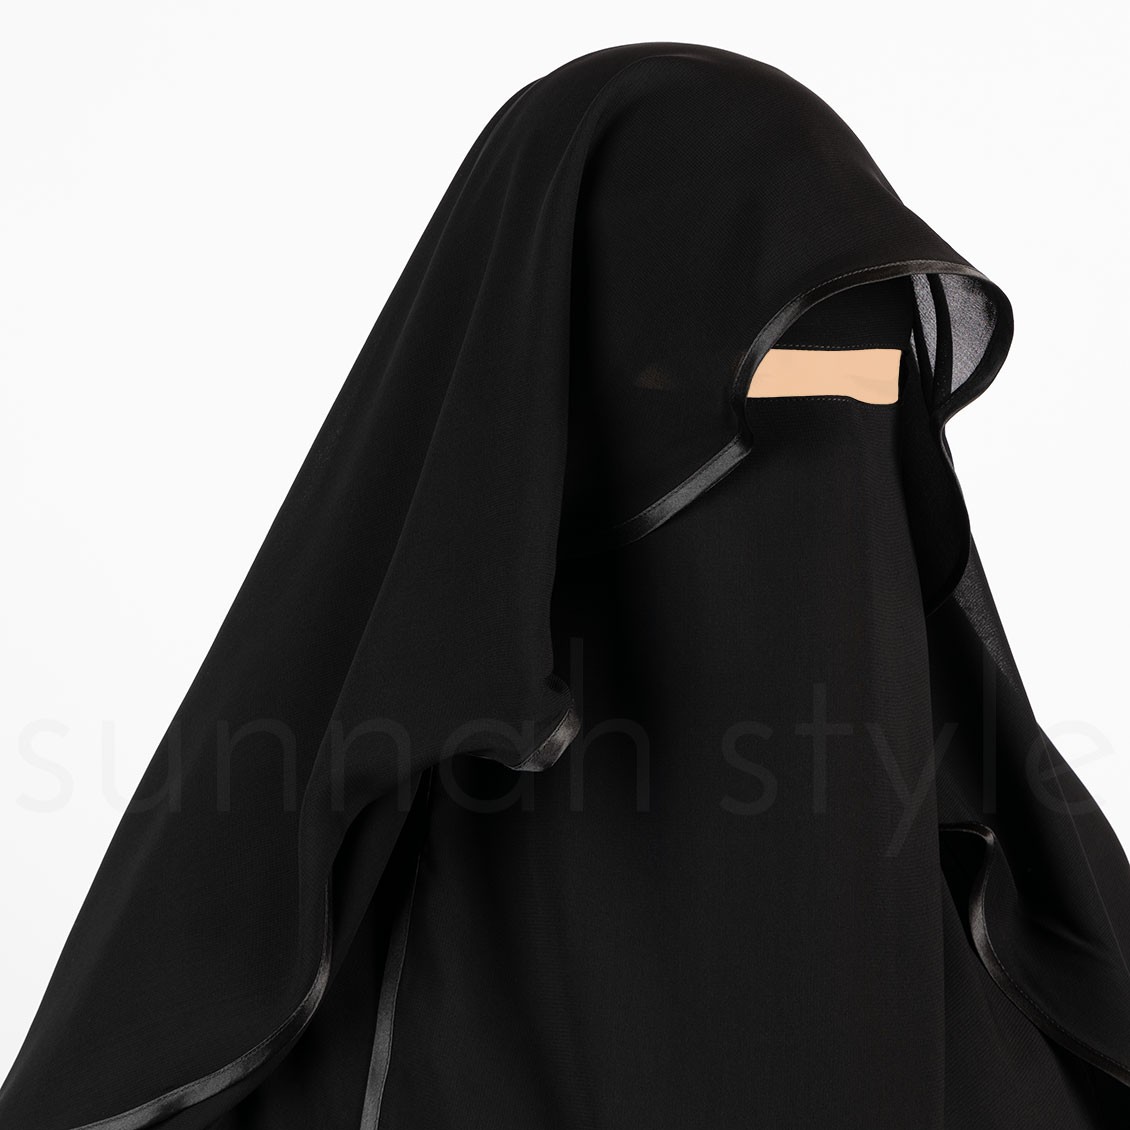 Sunnah Style Satin Trimmed Butterfly Niqab Black